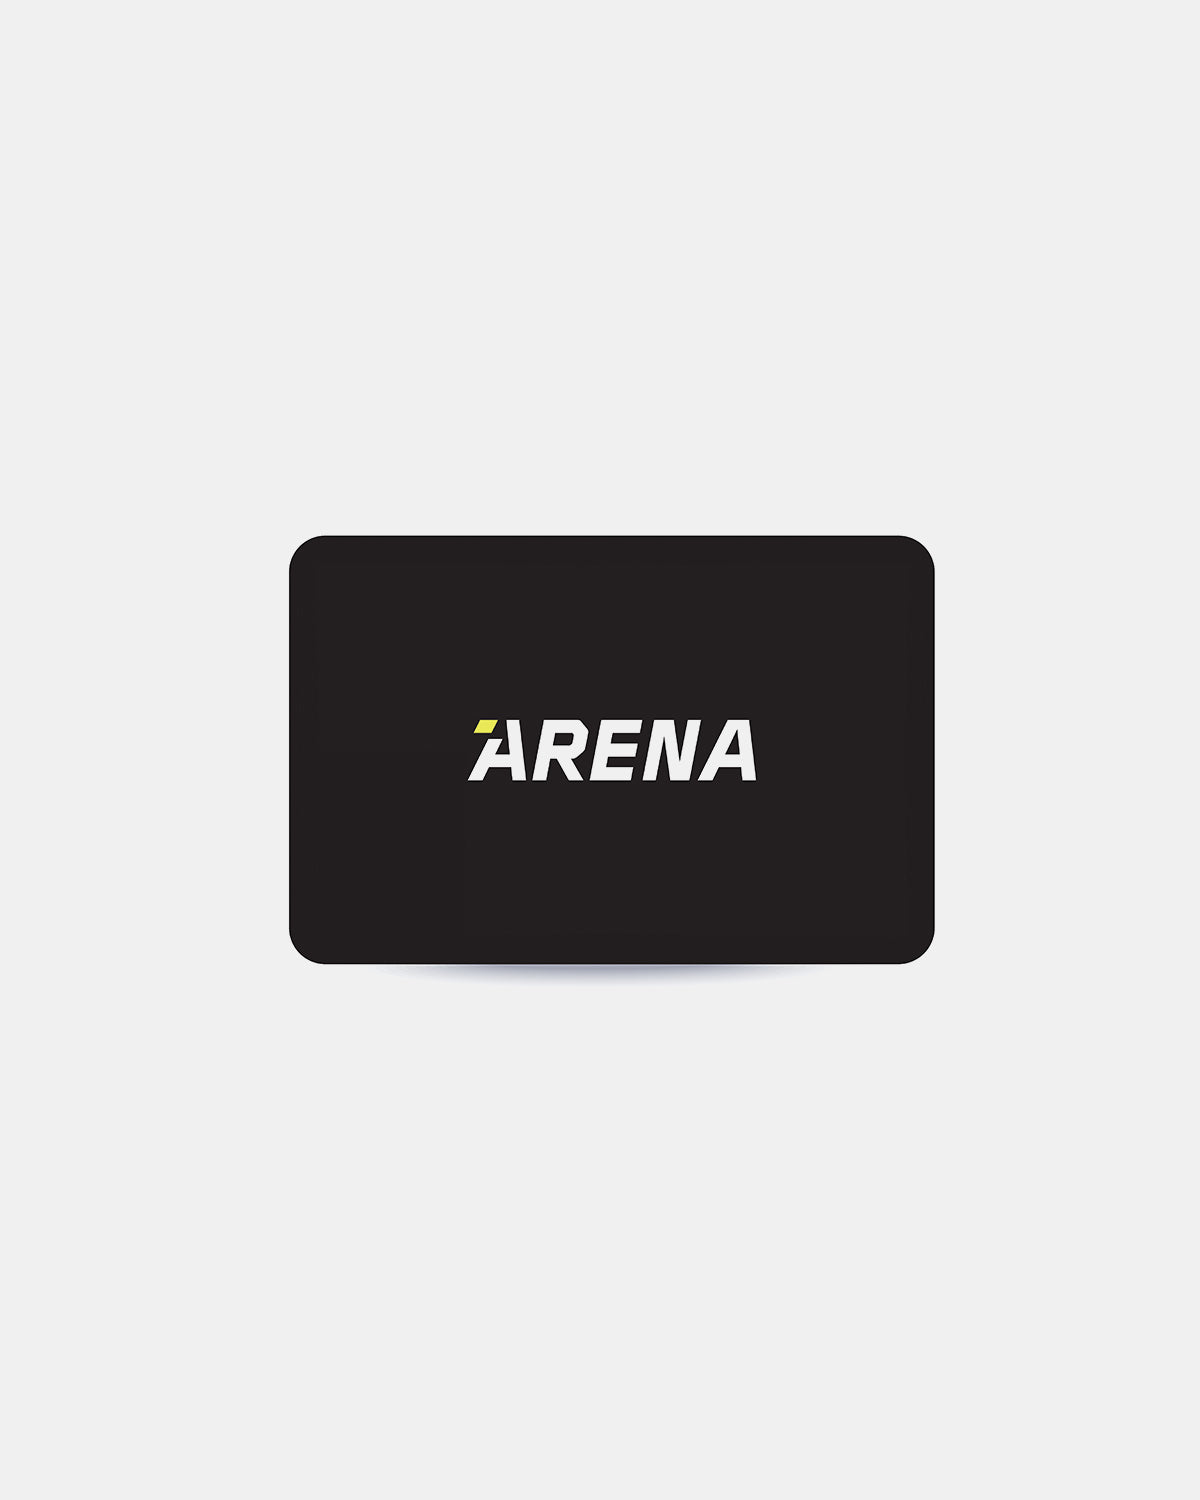 ARENA gift card 